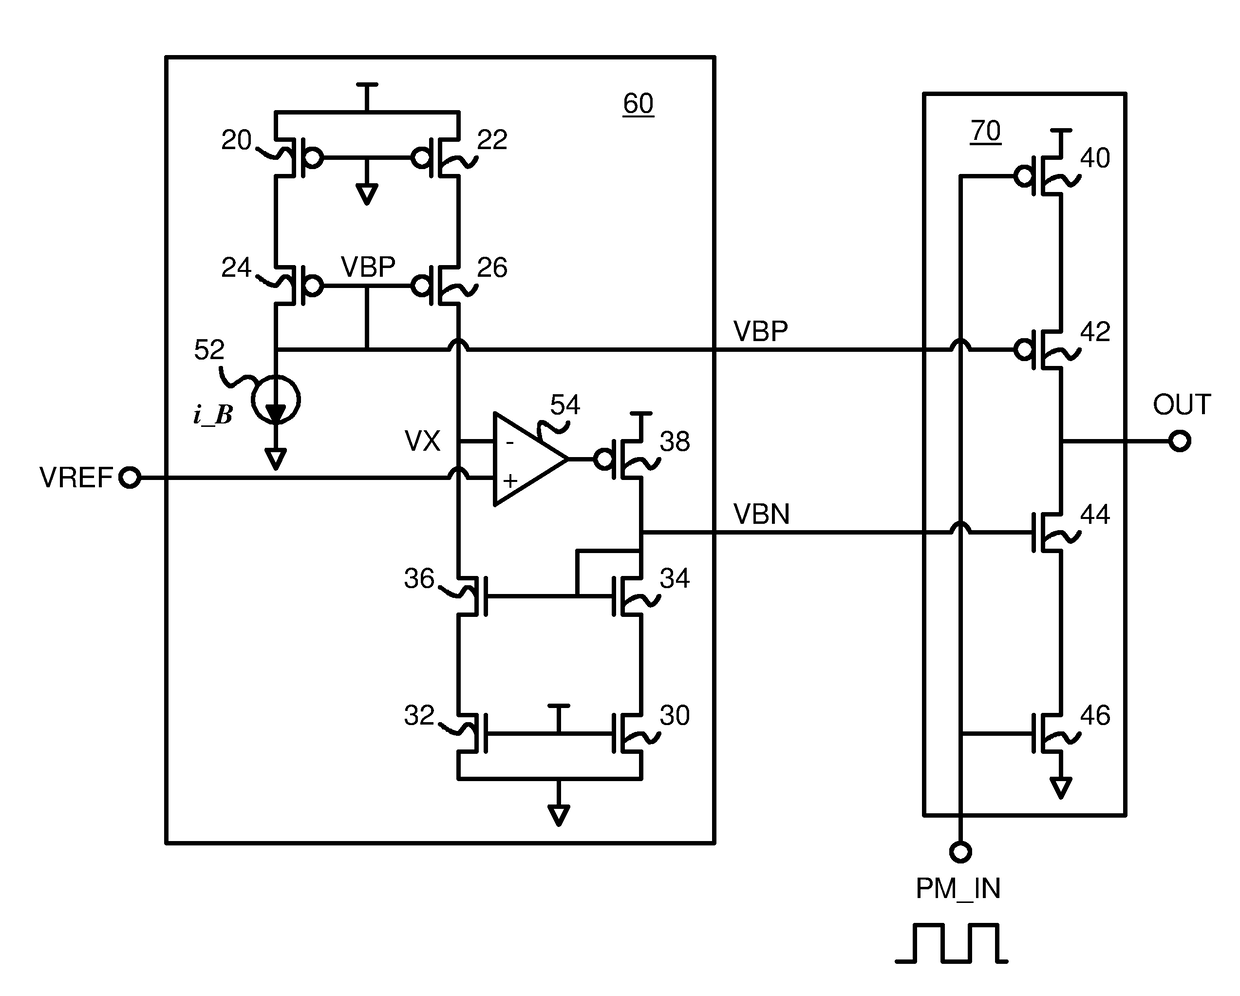 Harmonics suppression circuit for a switch-mode power amplifier